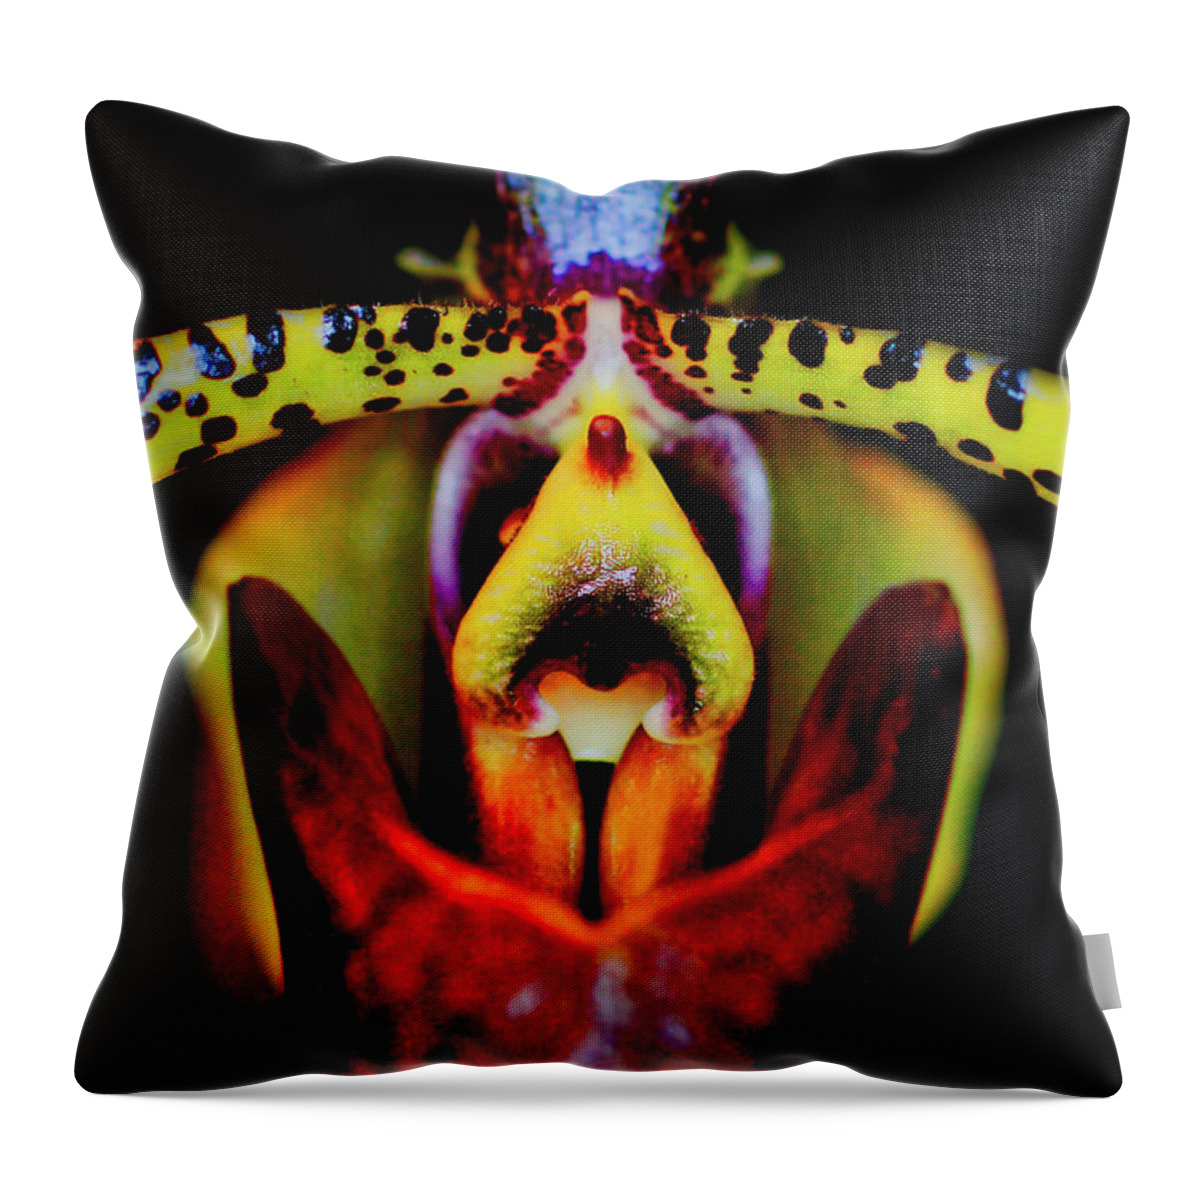 Orchid Throw Pillow featuring the photograph Orchid Study Six by Meta Gatschenberger